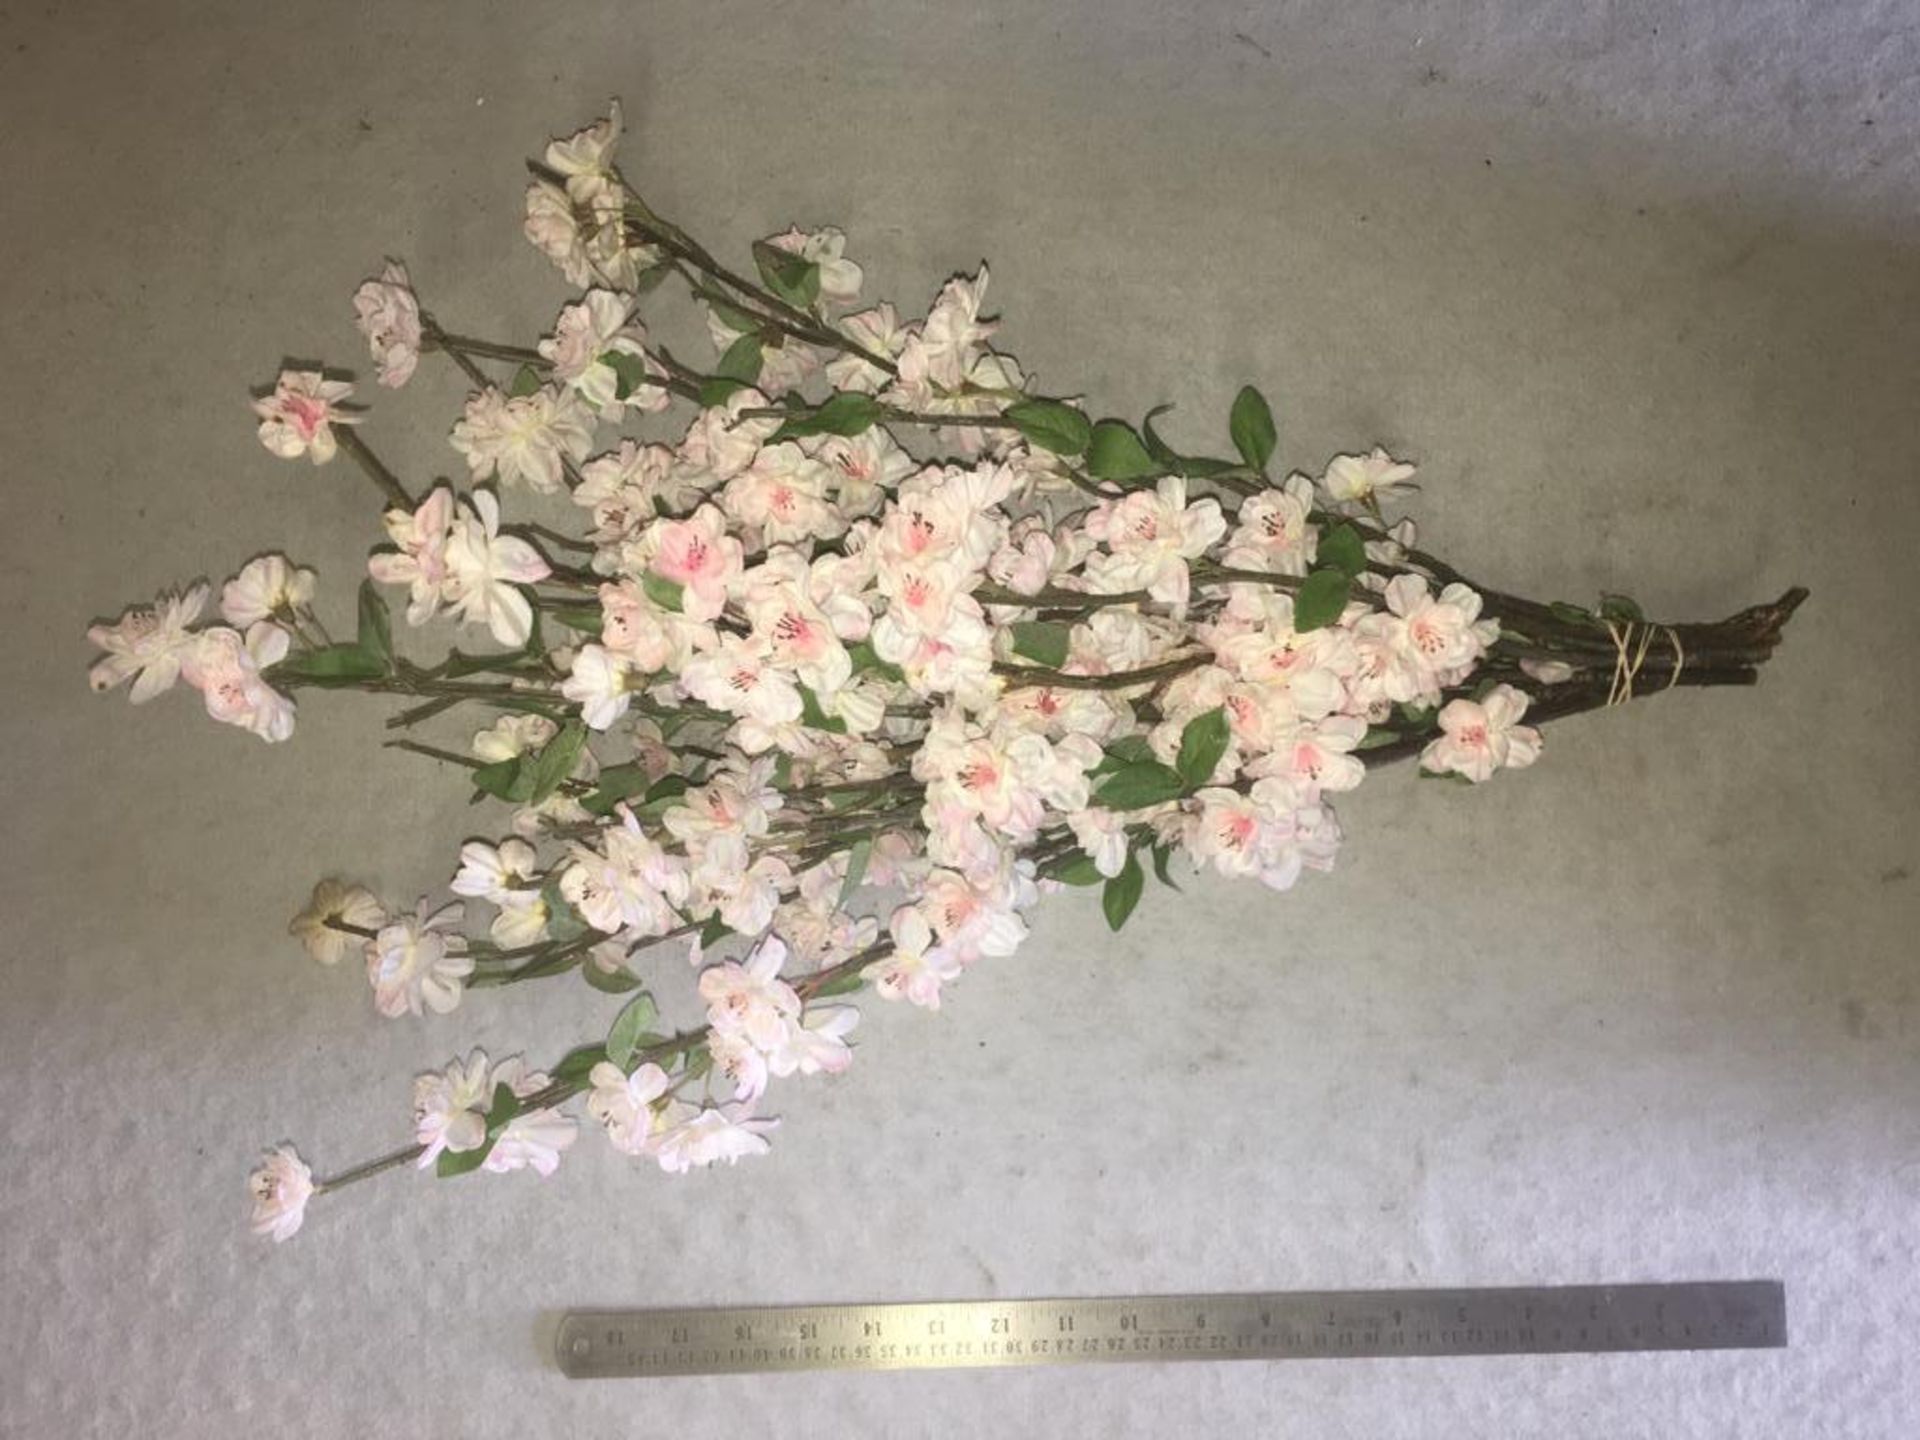 100 pieces of Artificial Blossom - pink double flowers - cut to various lengths but in good conditio